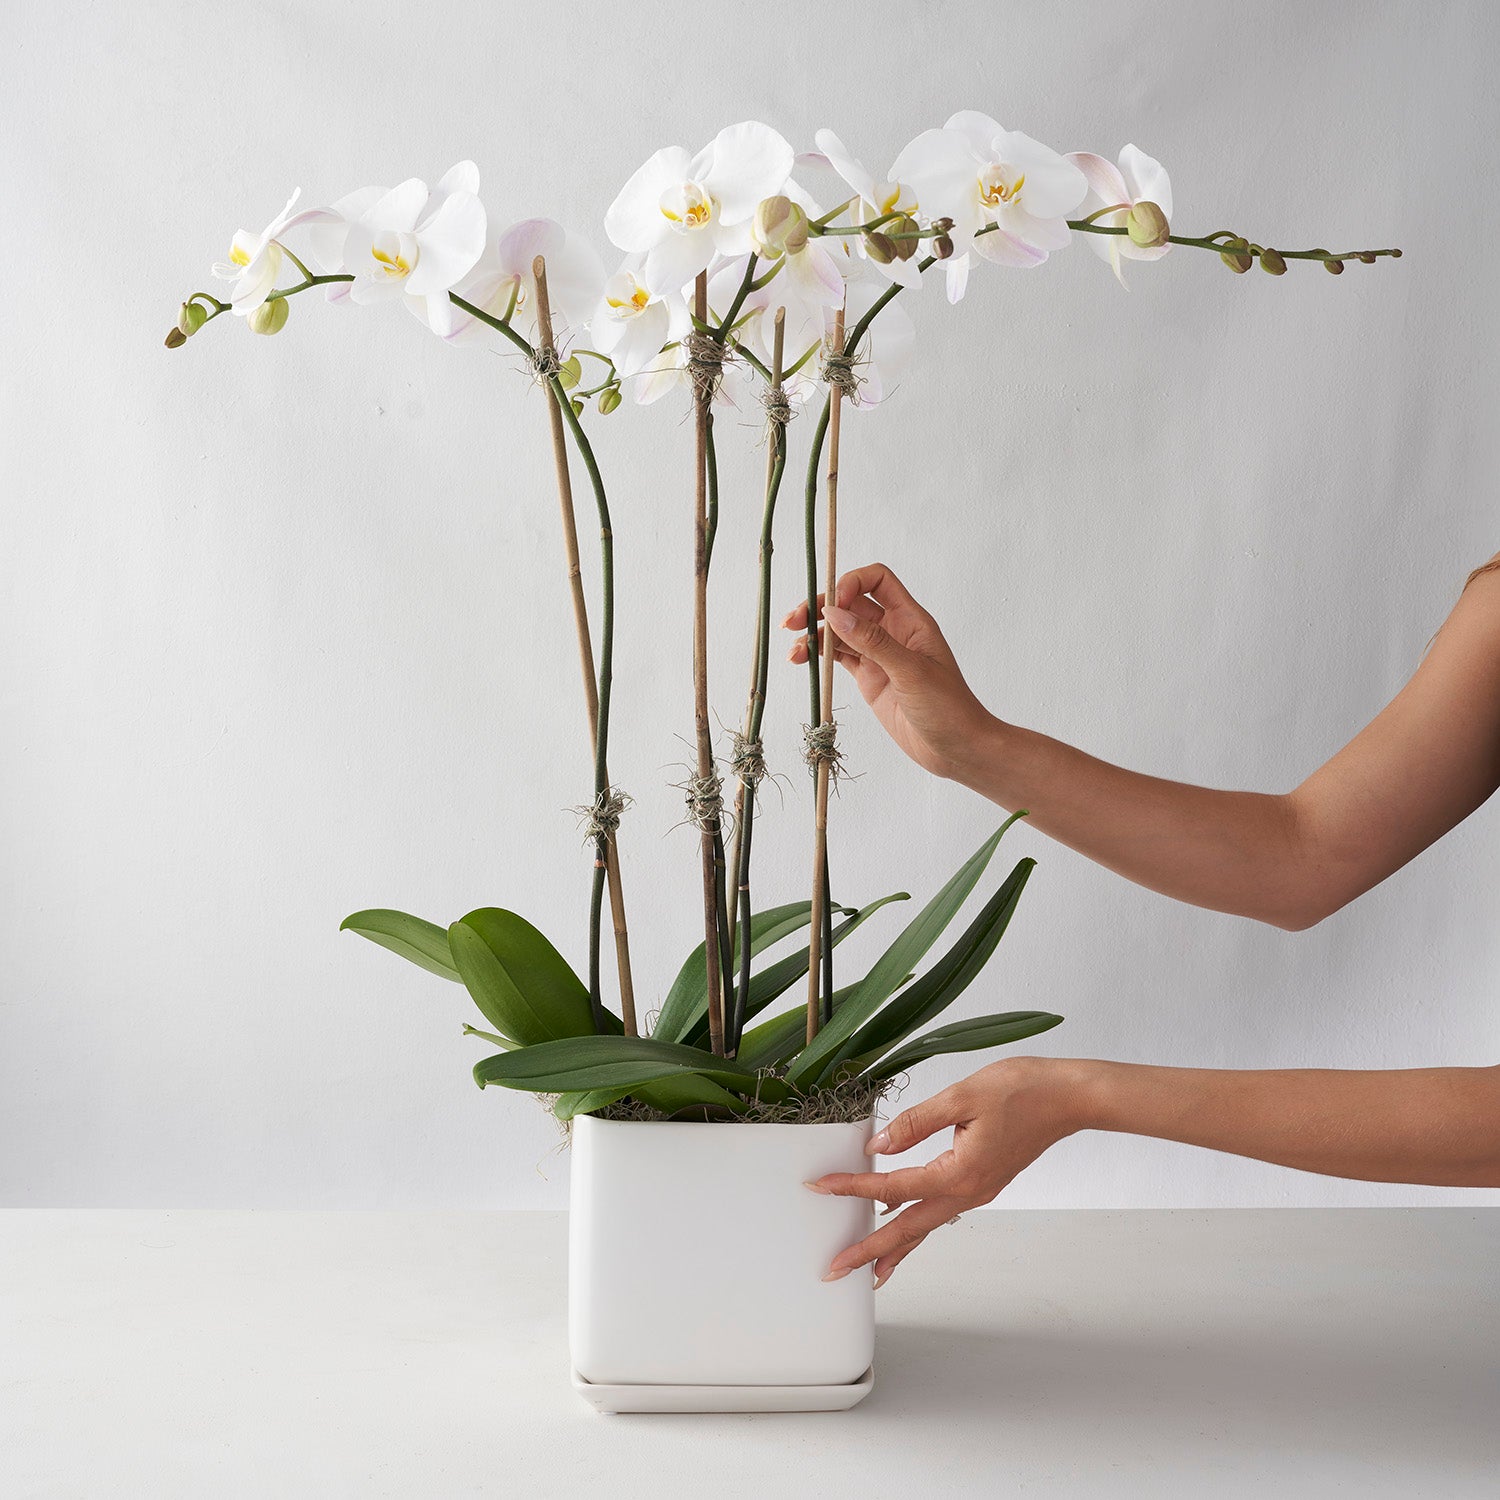 Two hands touching quare white ceramic pot containing white phalaenosis orchid plants with four flowering stems on white background